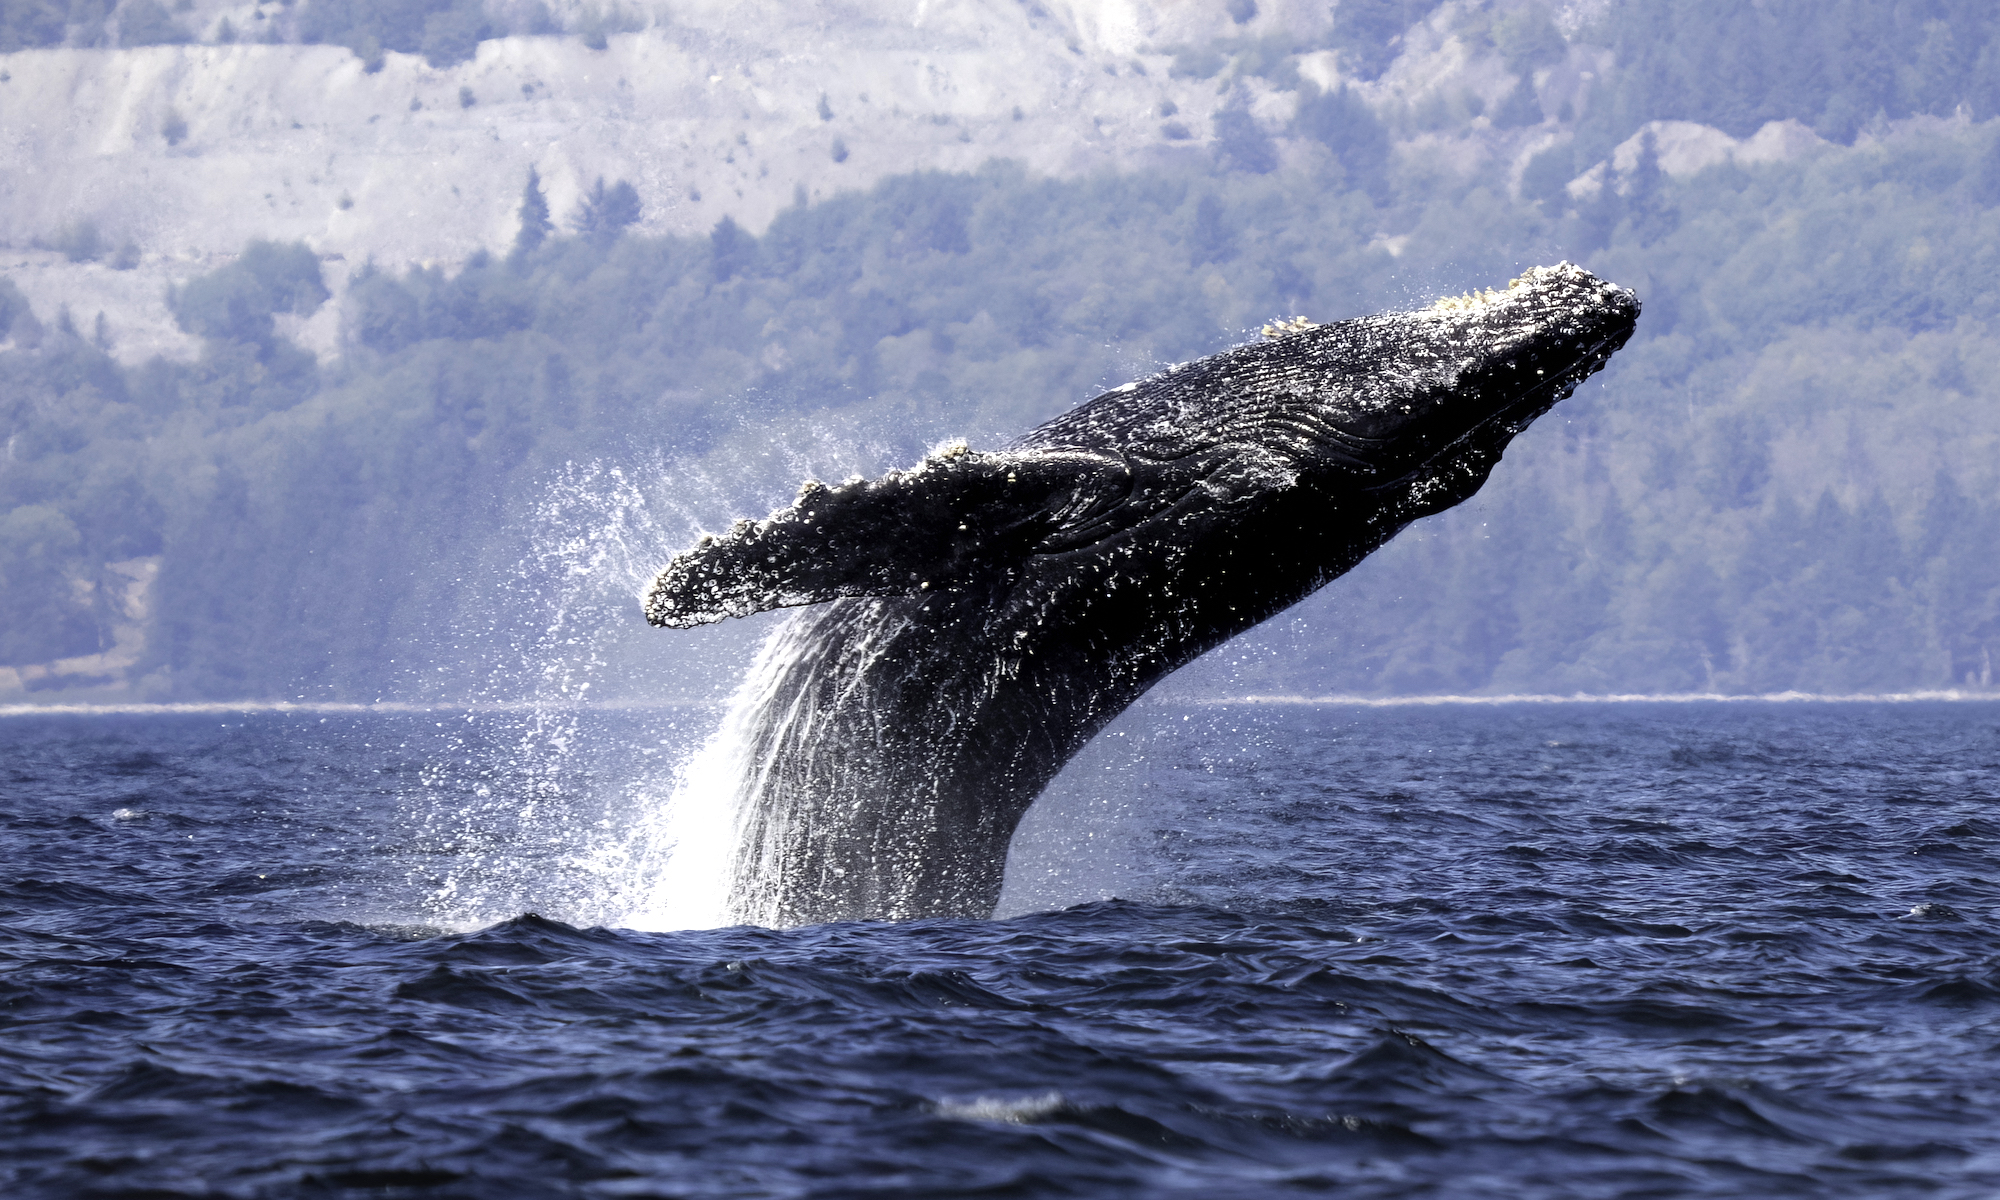 A humpback whale seen breaching with more than half of its body out of the water. Land with bare cliff and trees in the background.